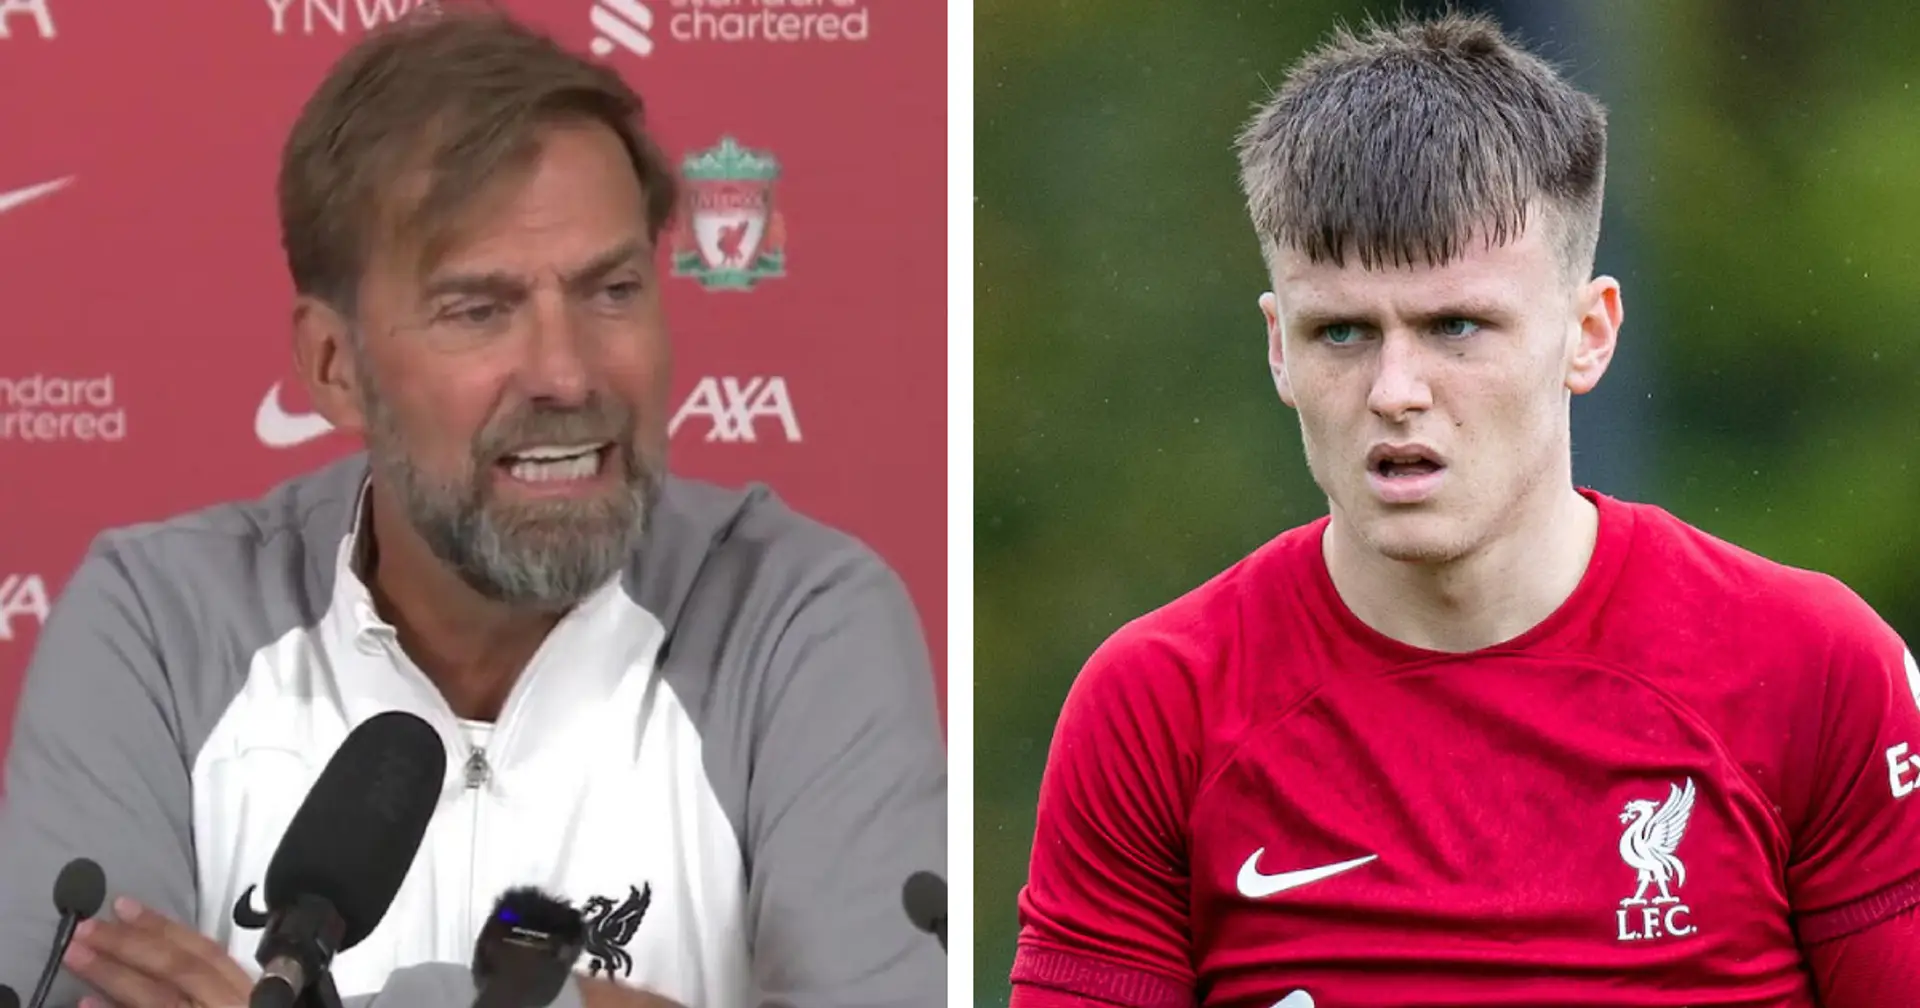 Klopp names 3 Liverpool youngsters who impressed him in Dubai - and one who 'still has to adapt'